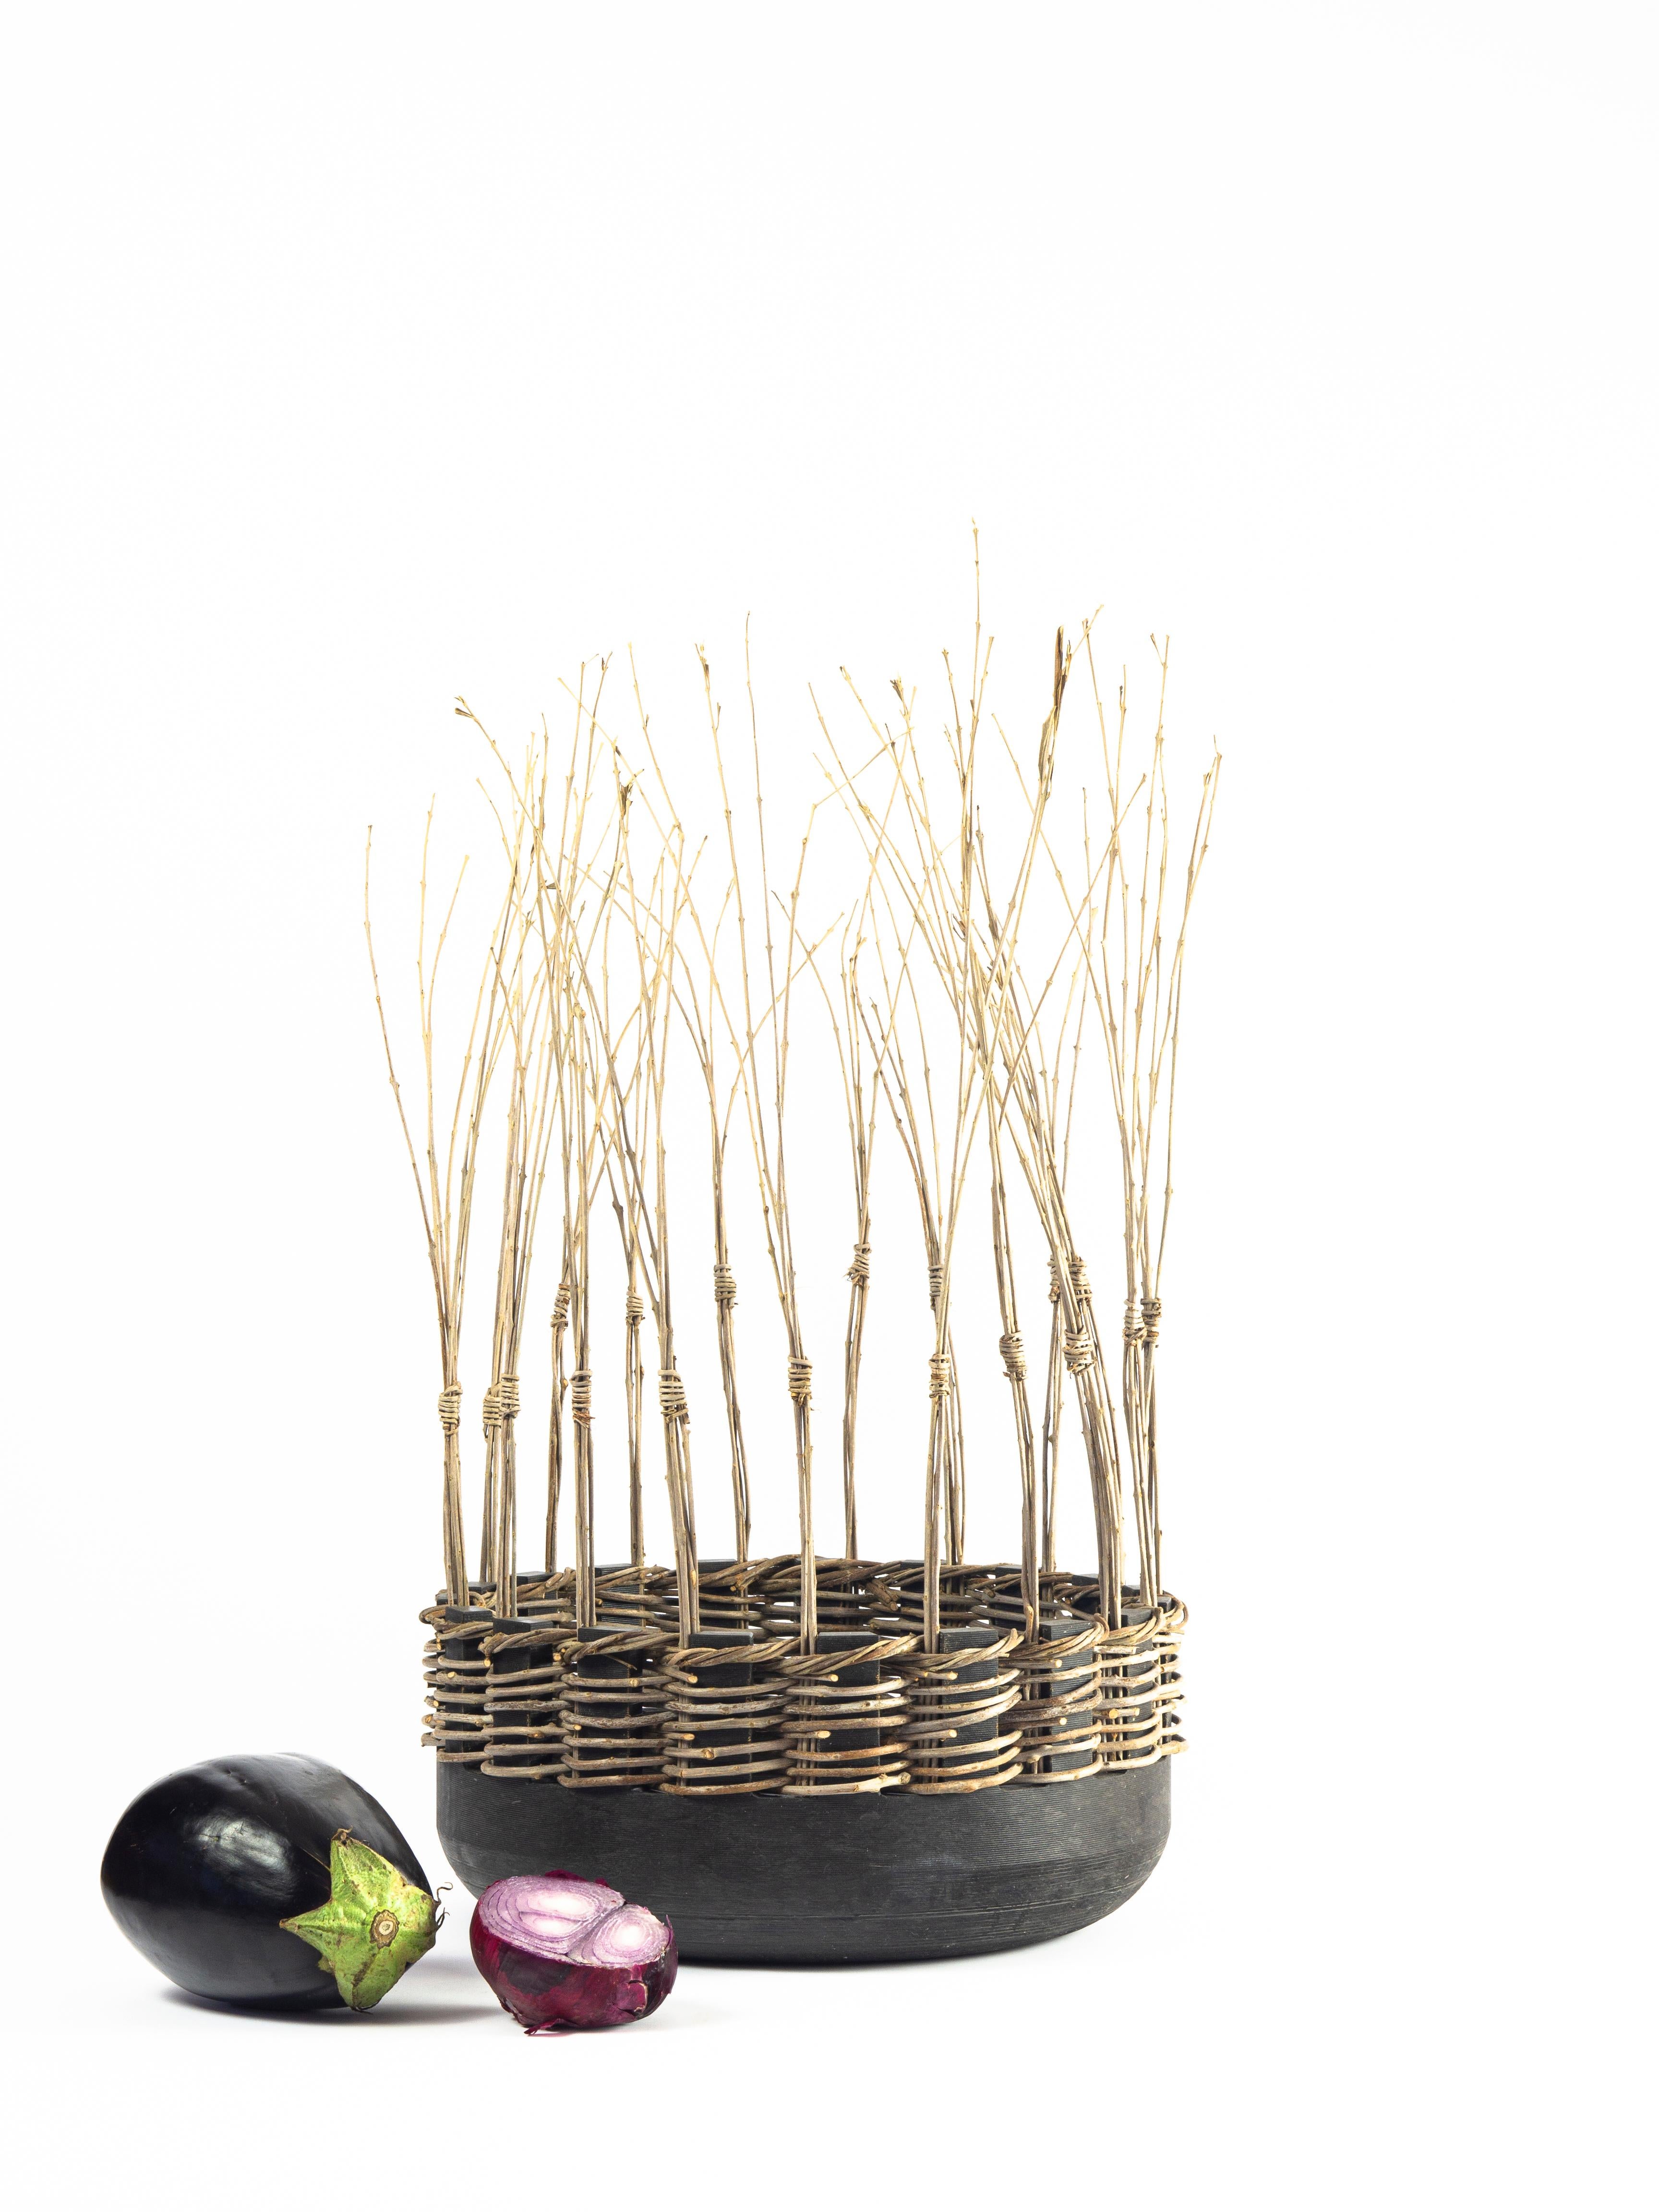 A collection of vases in Jerissa Stone and intertwined olive branches that comes from the theme of the 